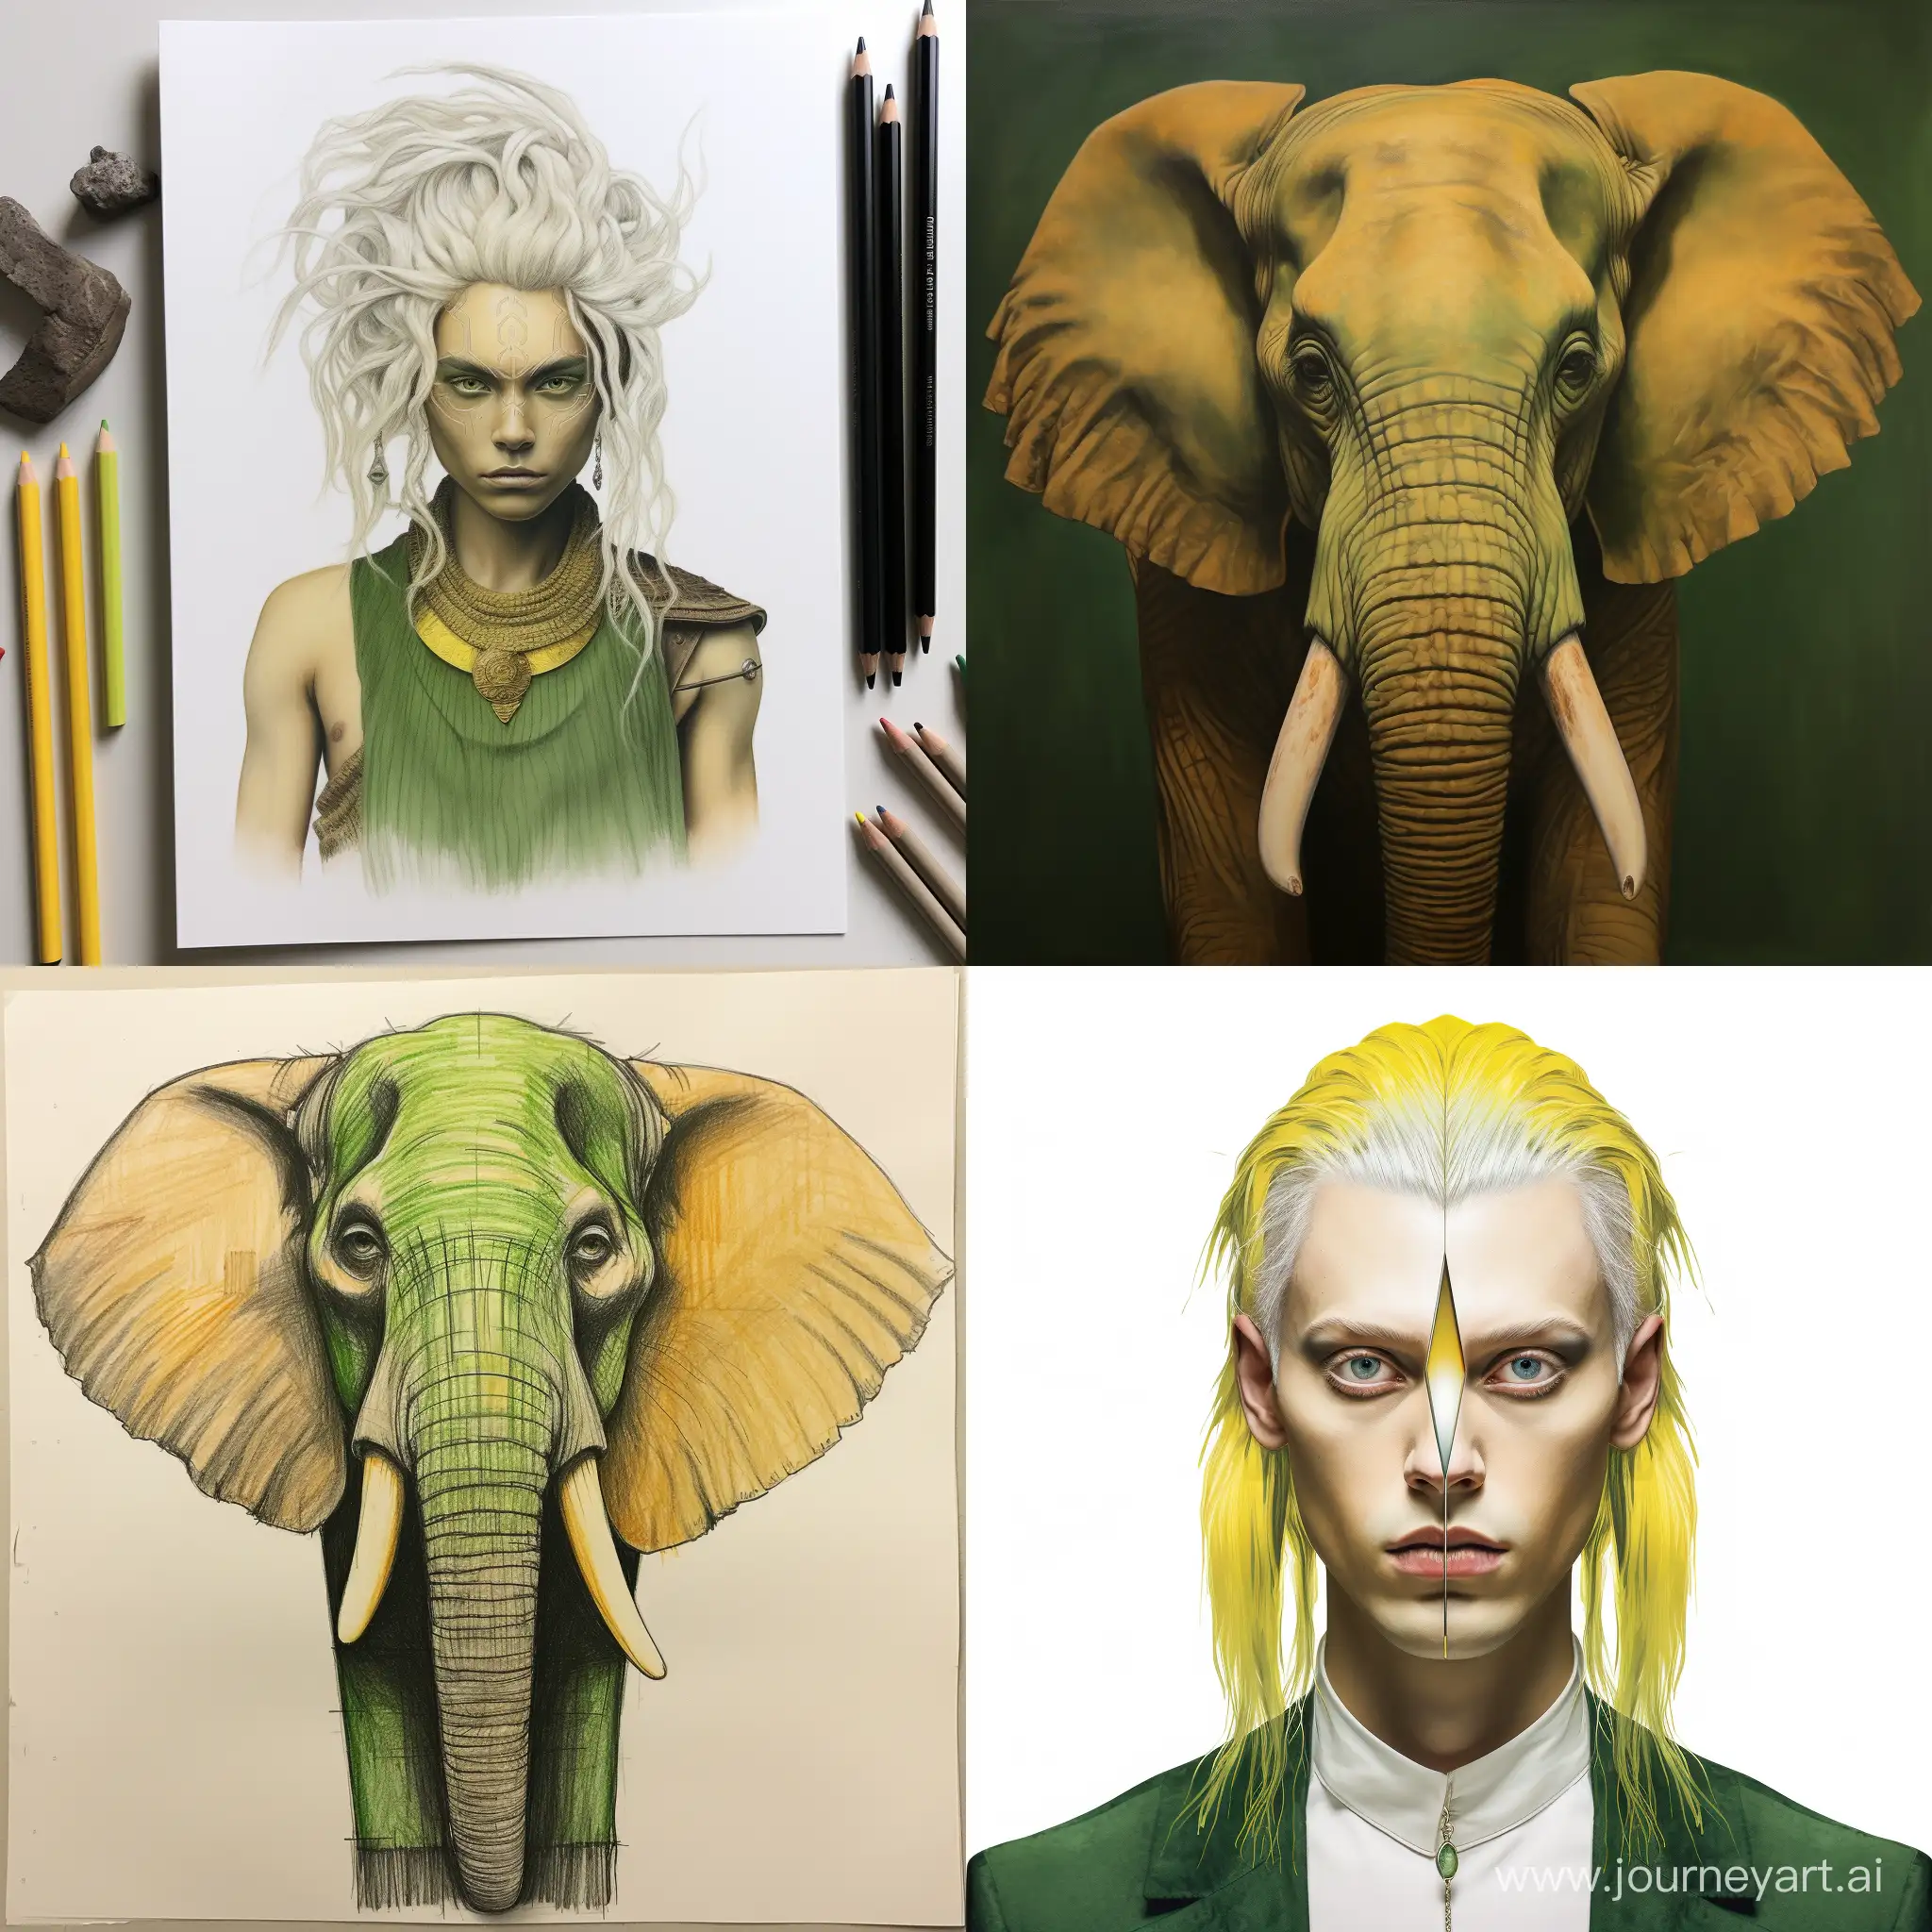 can you draw a realistic image of a male with green crimped hair, 3 legs, yellow skin, 4 eyes, tusks, no arms and a square shaped head